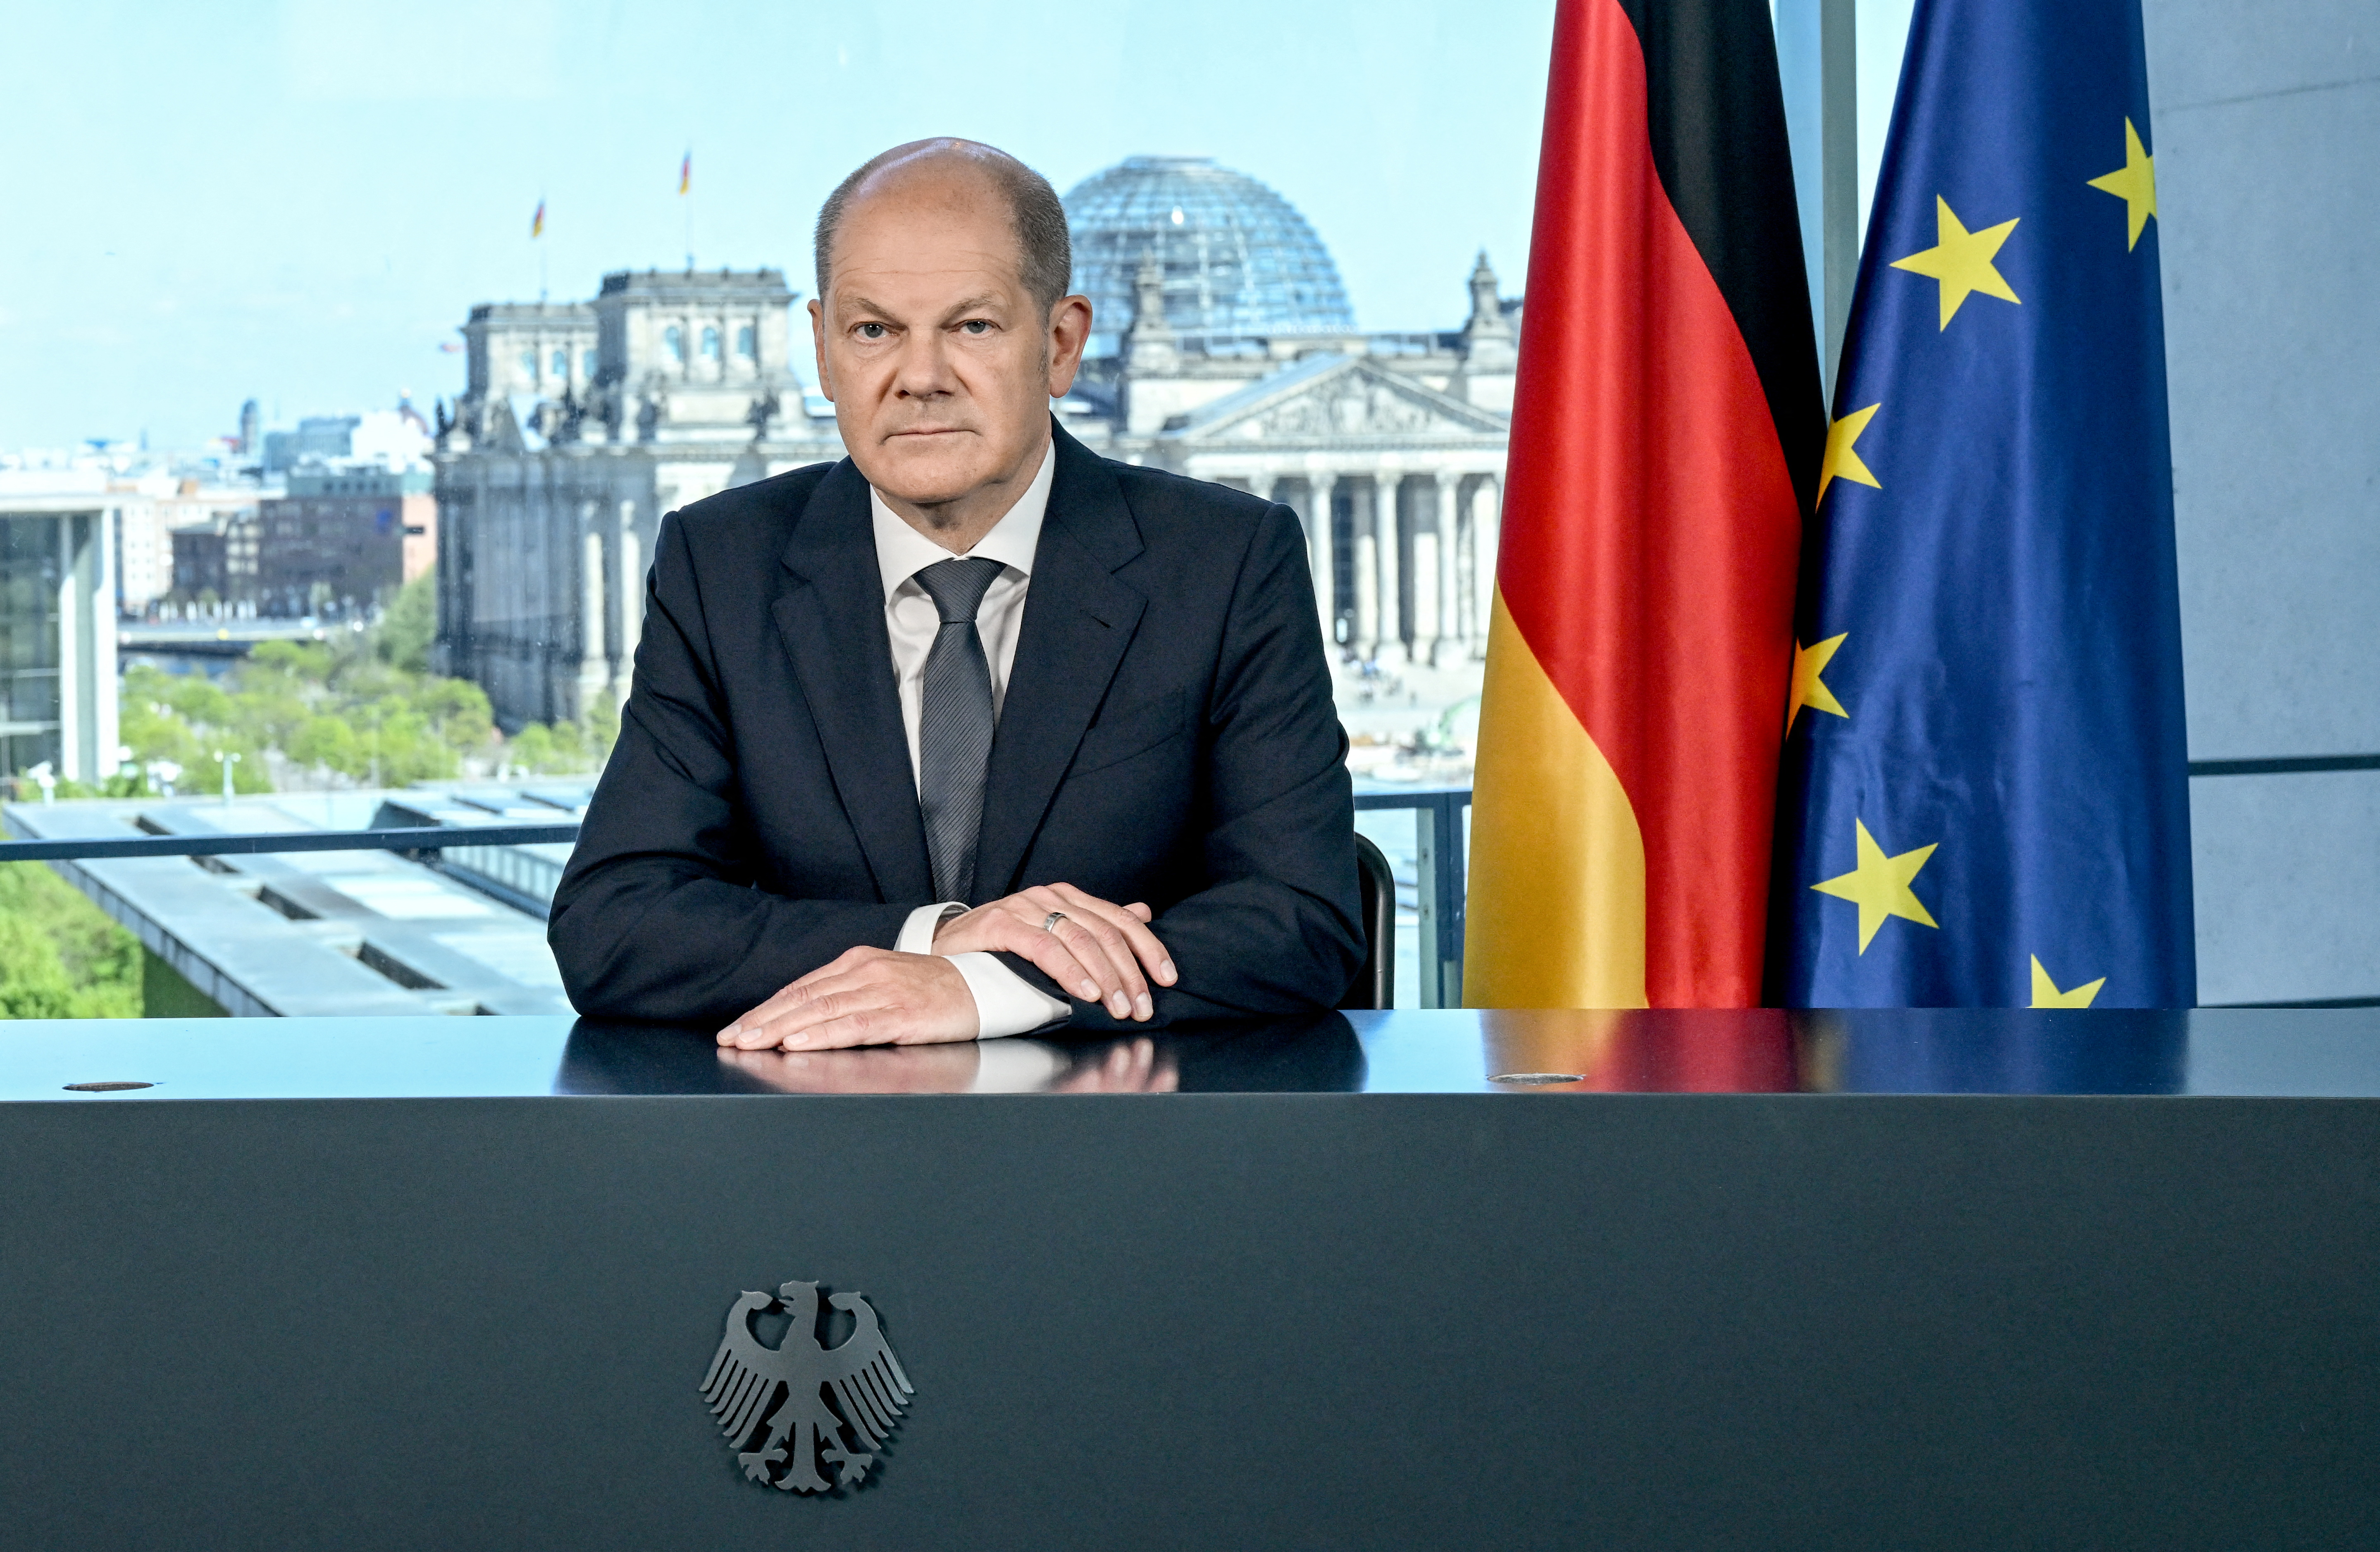 German Chancellor Olaf Scholz addresses the nation in Berlin